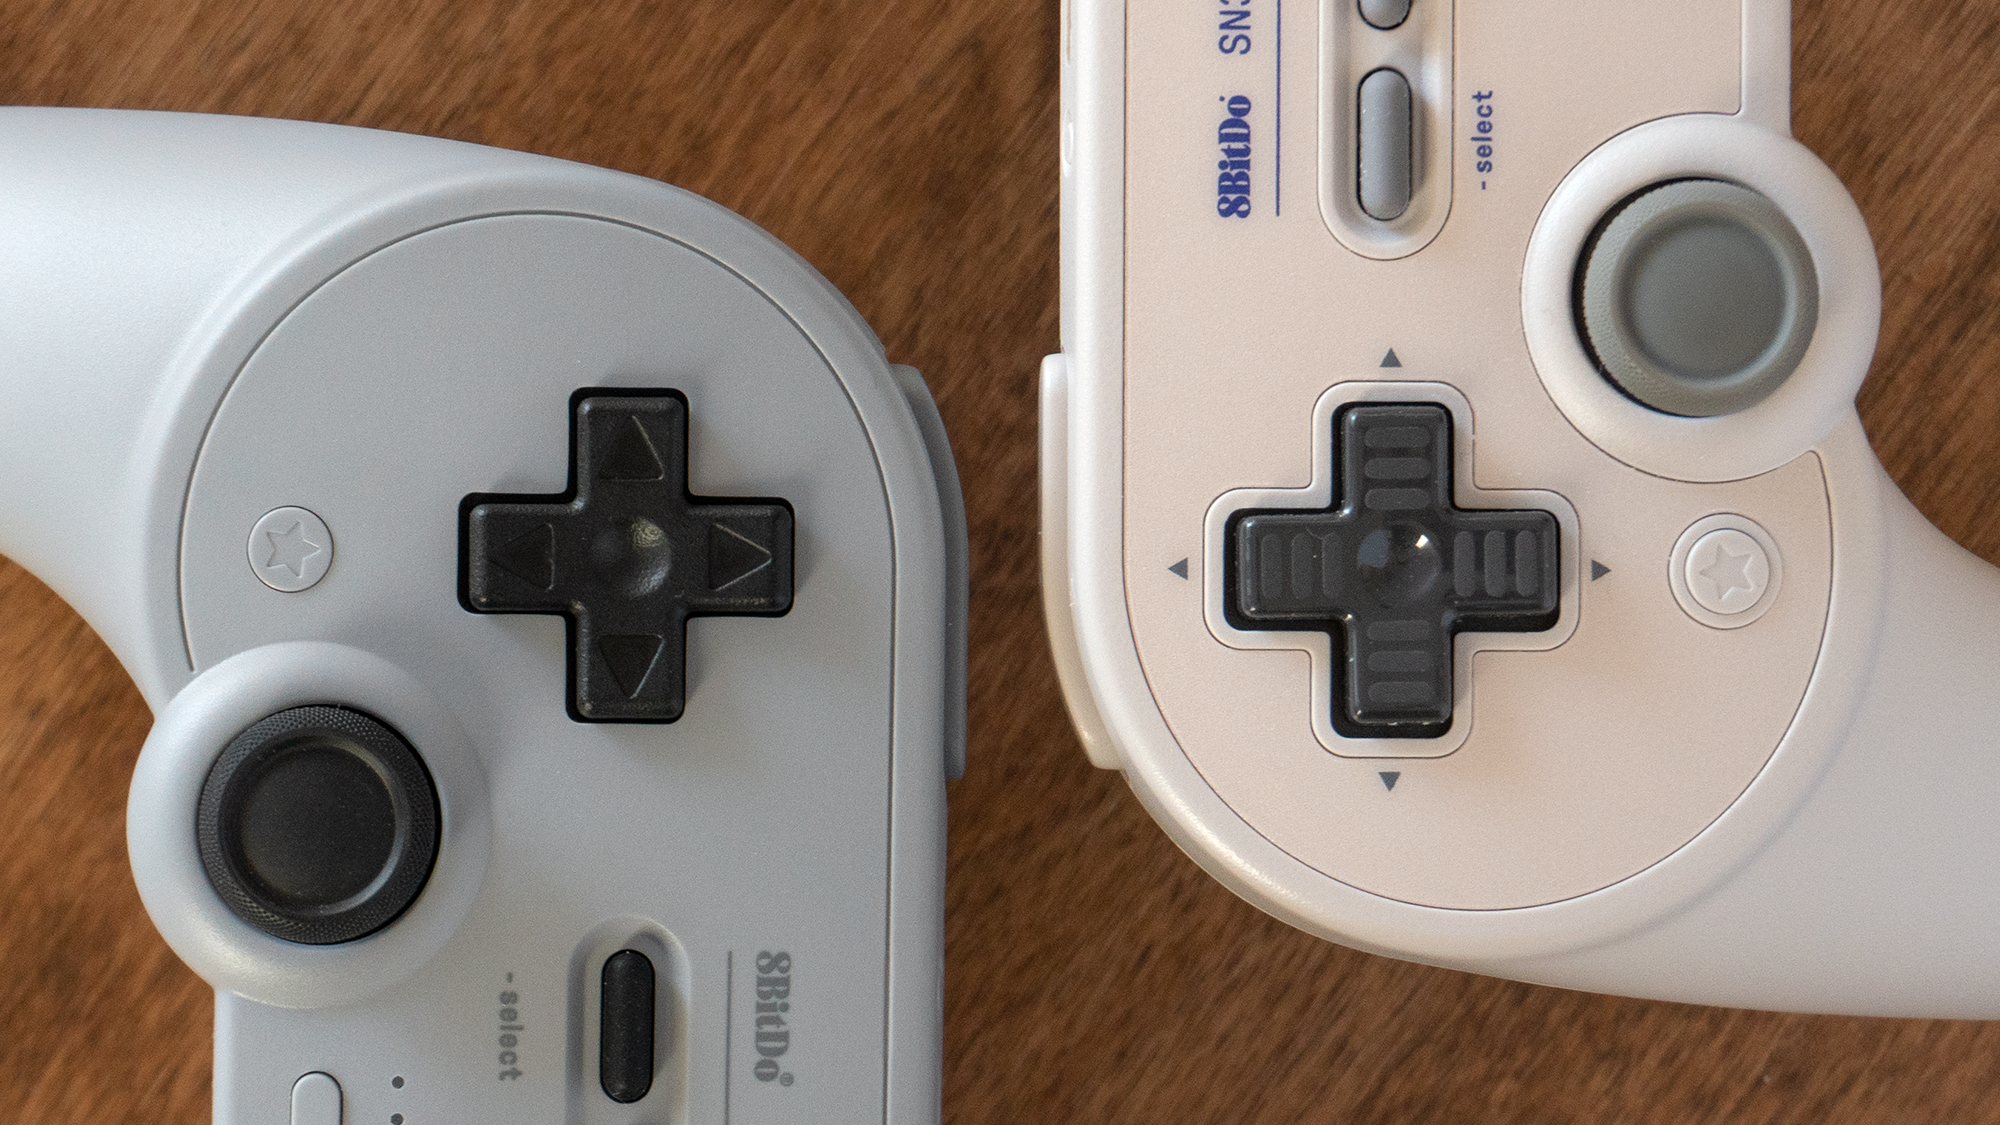 The Grey Edition and Black Edition versions of the Pro 2 controller also feature an improved directional pad with a grippy matte finish and a design that copies the D-pad on the original SNES' gamepad. (Photo: Andrew Liszewski/Gizmodo)